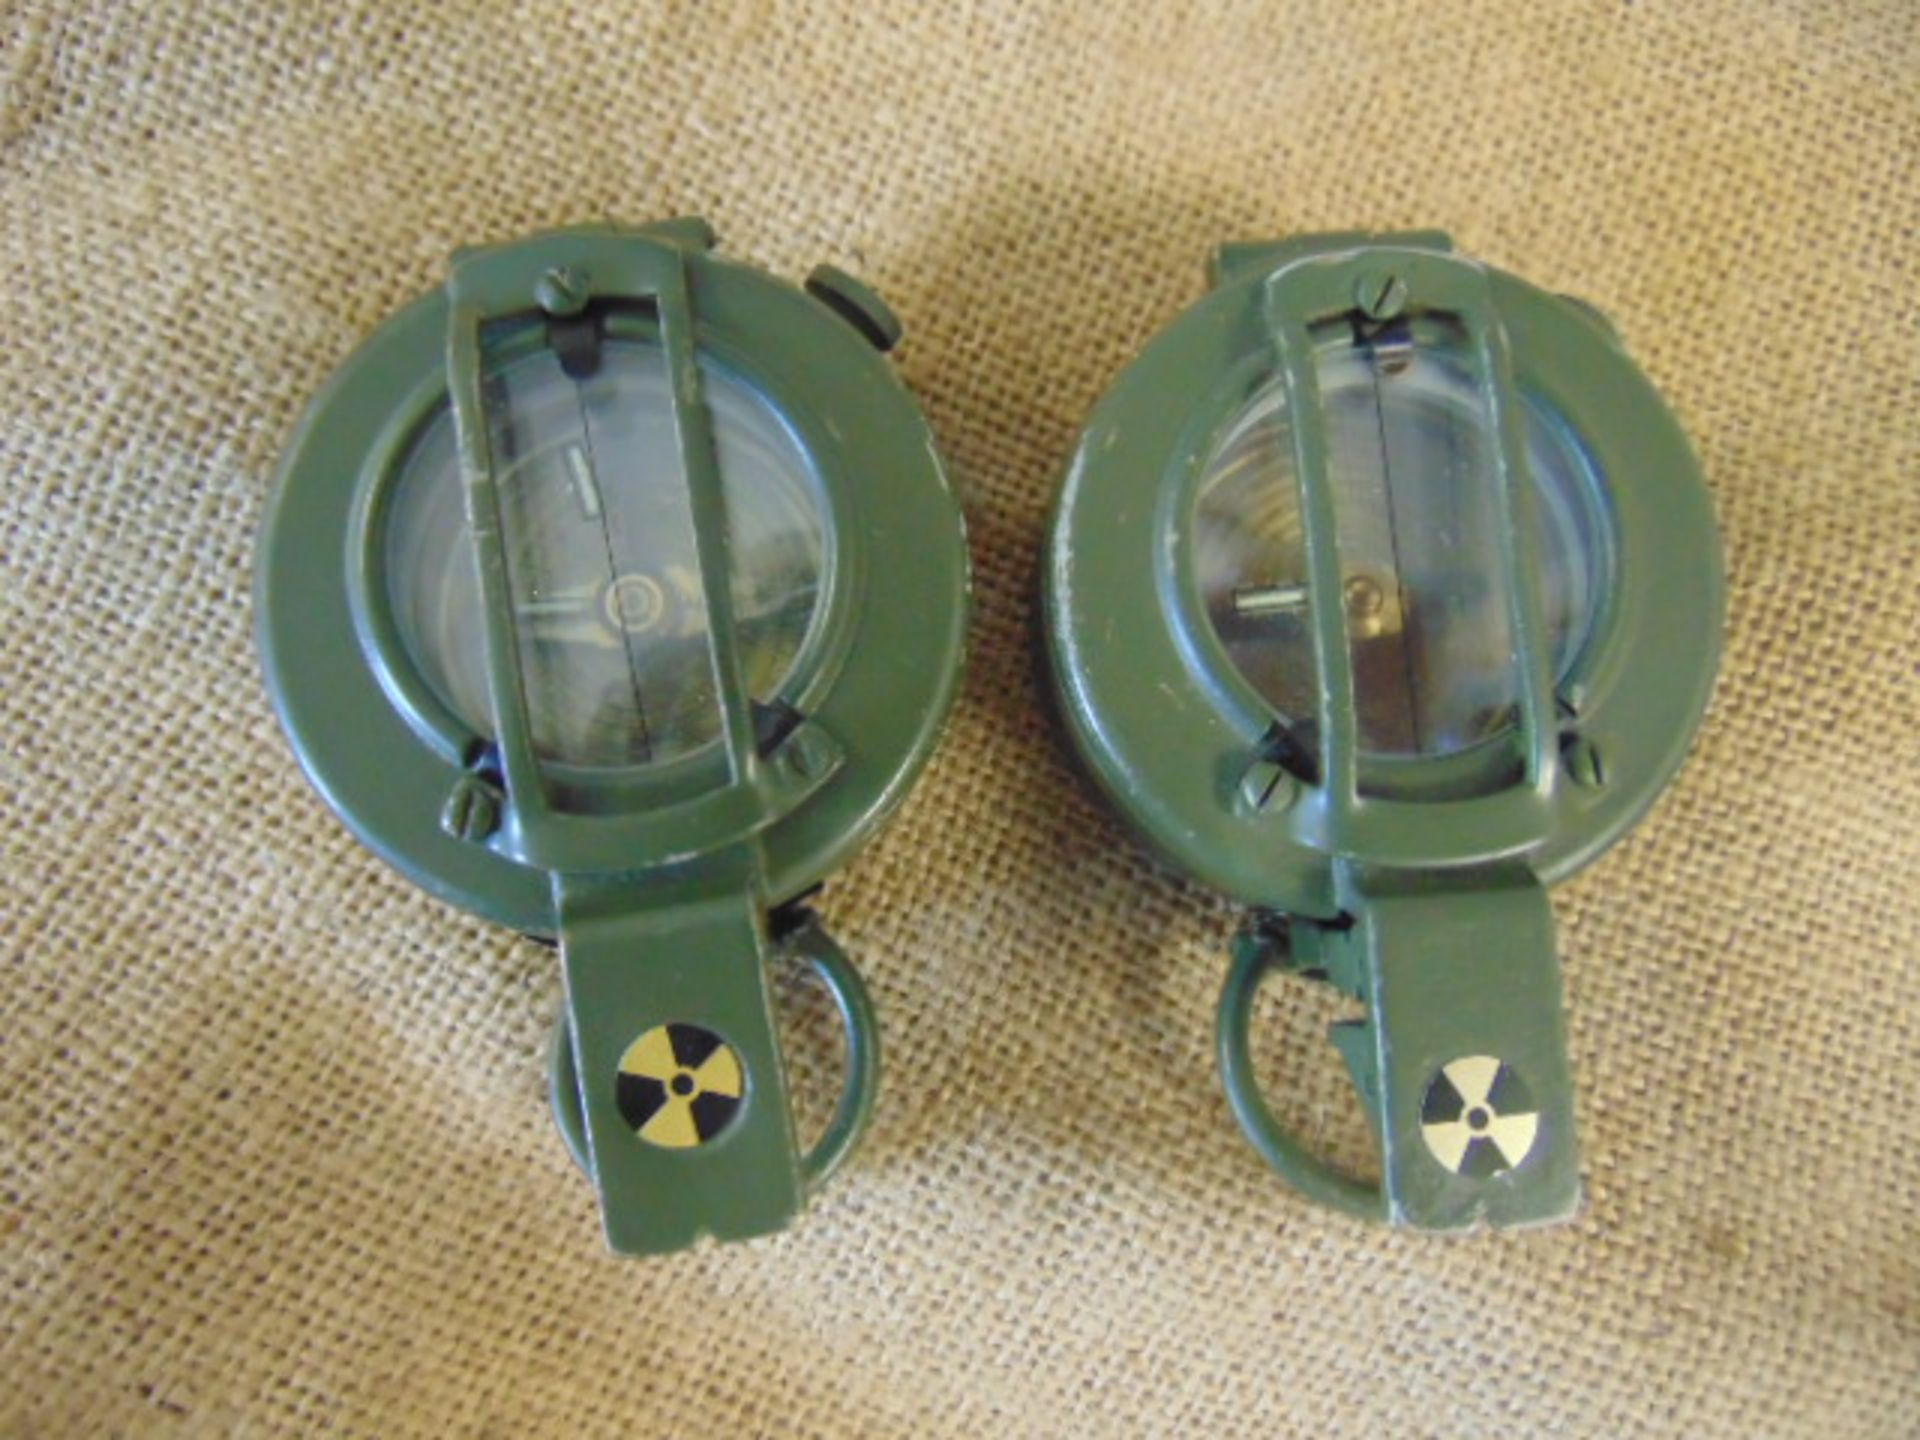 2 x Genuine British Army Stanley Prismatic Marching Compass - Image 3 of 5